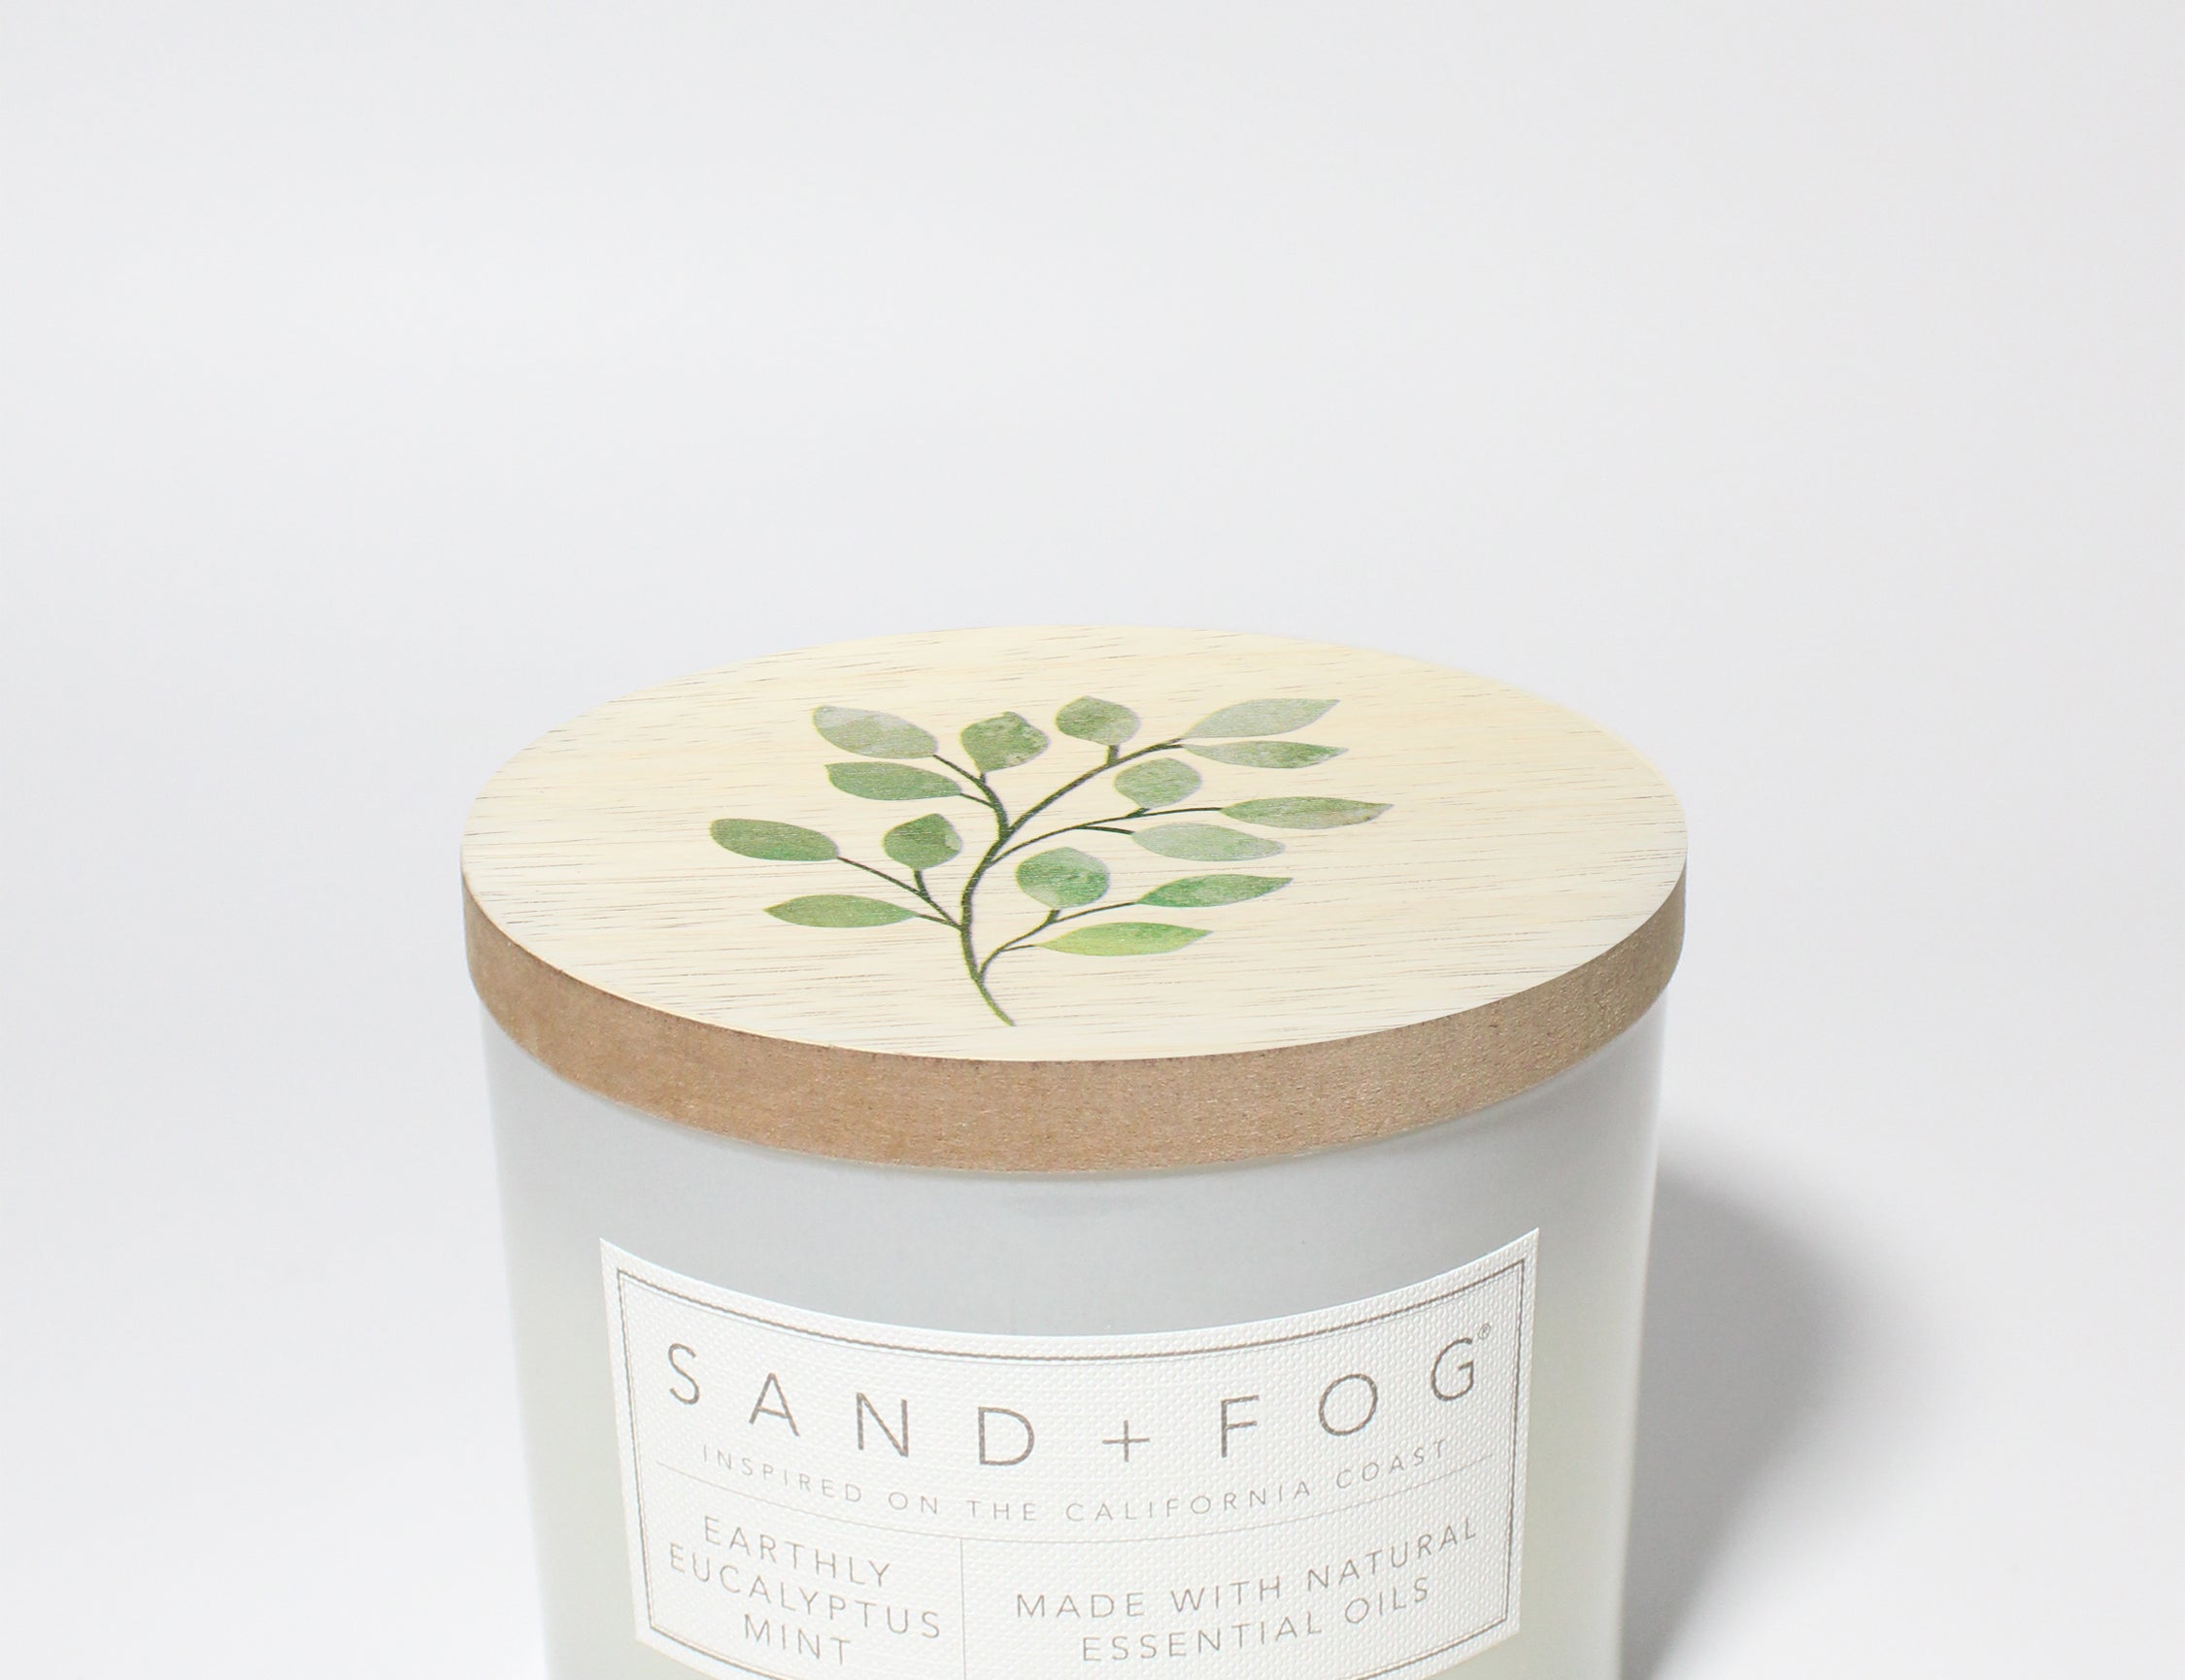 Earthly Eucalyptus Mint 12 oz scented candle White vessel with painted olive branch lid